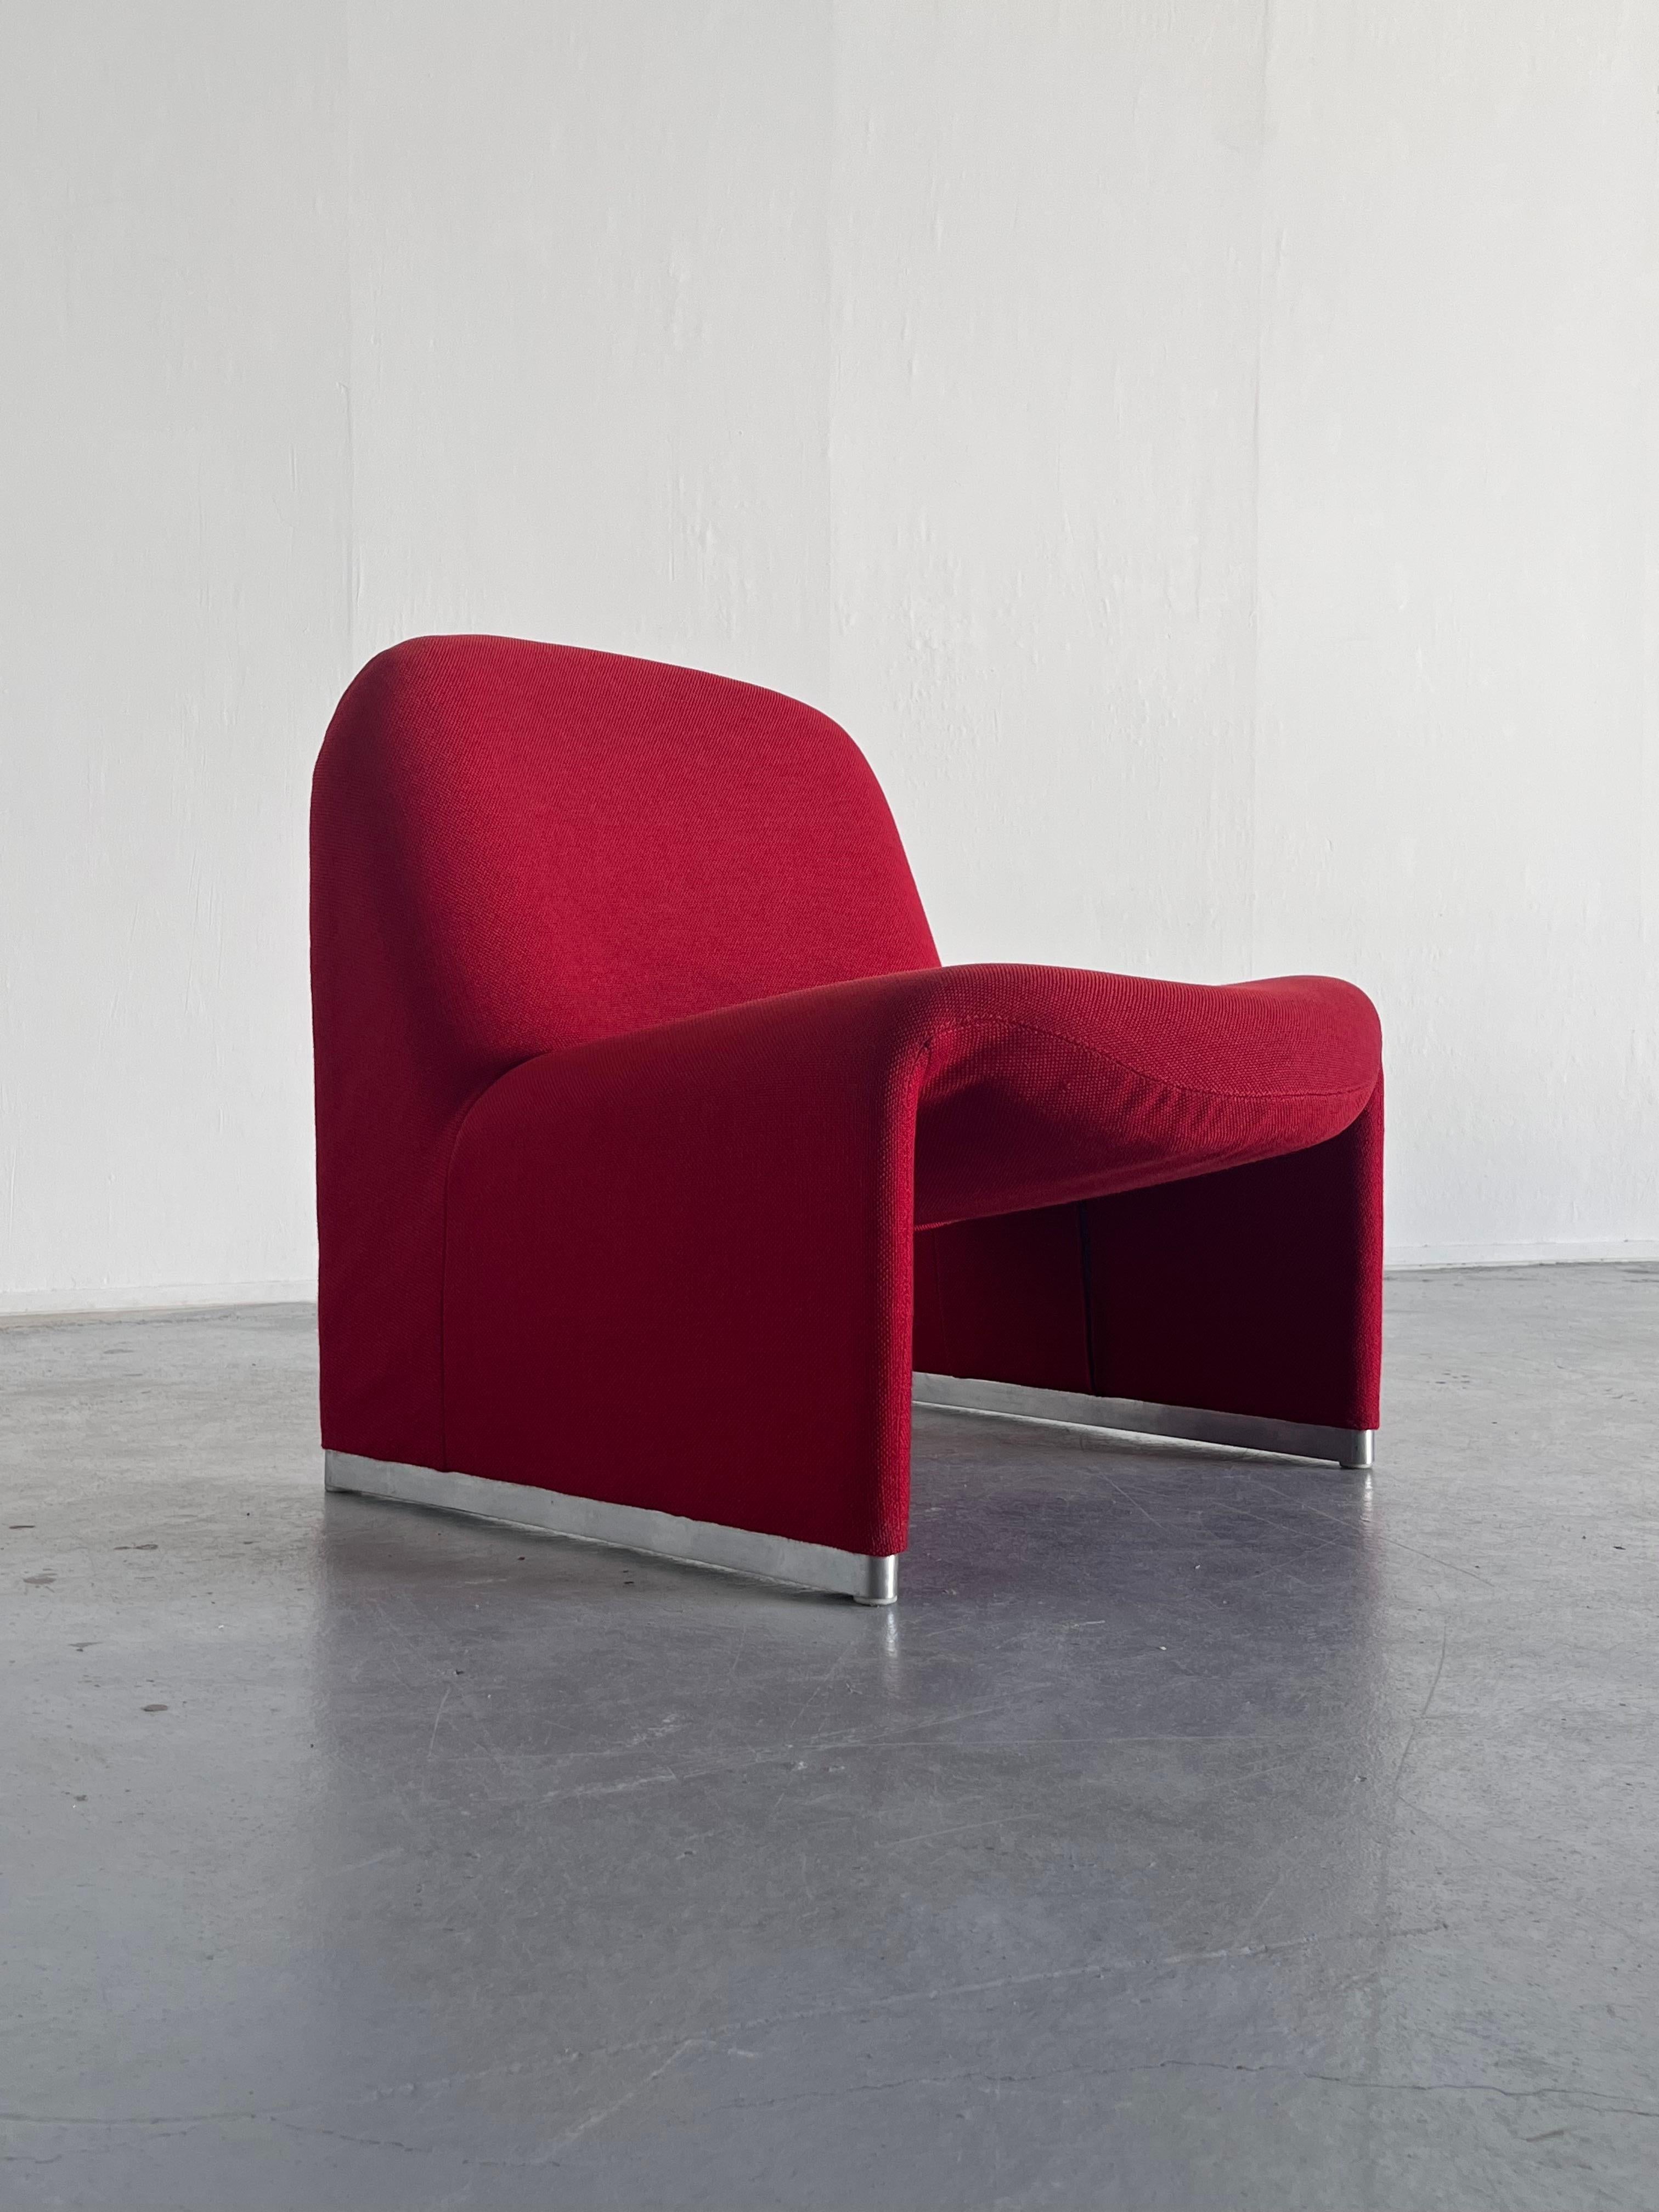 1 of 2 Iconic 'Alky' chairs by Giancarlo Piretti for Anonima Castelli, 1970s 3